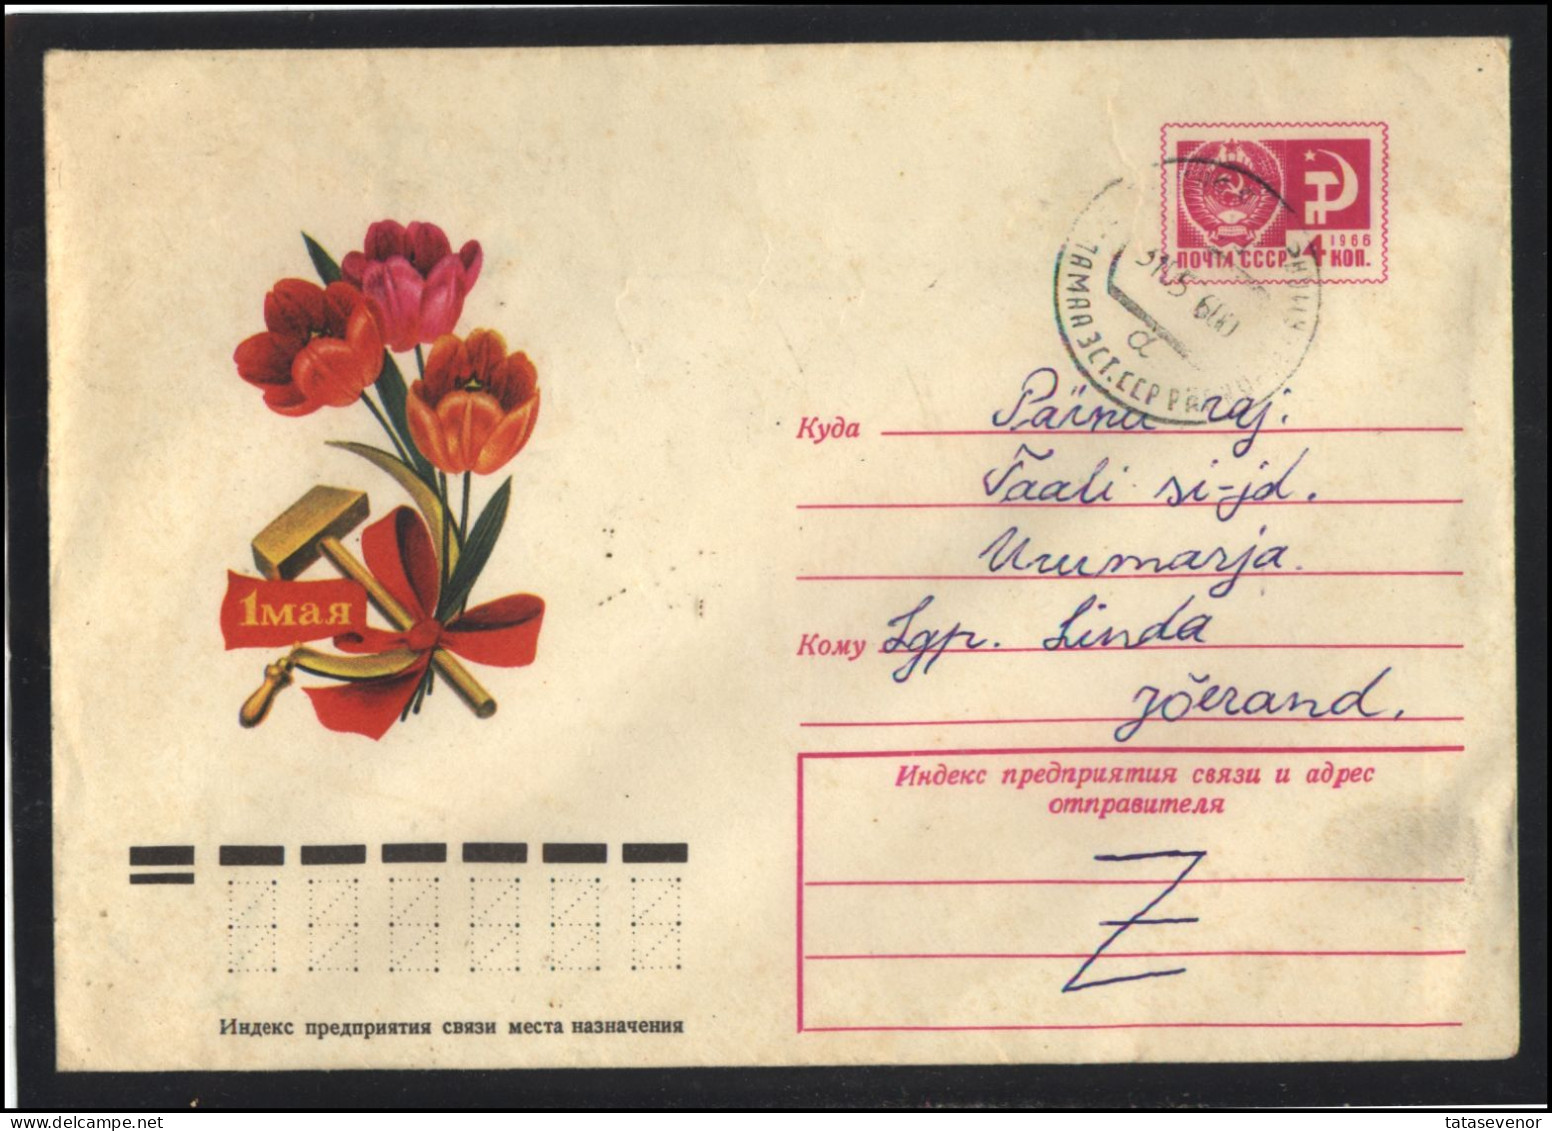 RUSSIA USSR Stationery USED ESTONIA AMBL 1359 AIAMAA May Day Celebration Flowers Tulips - Non Classés